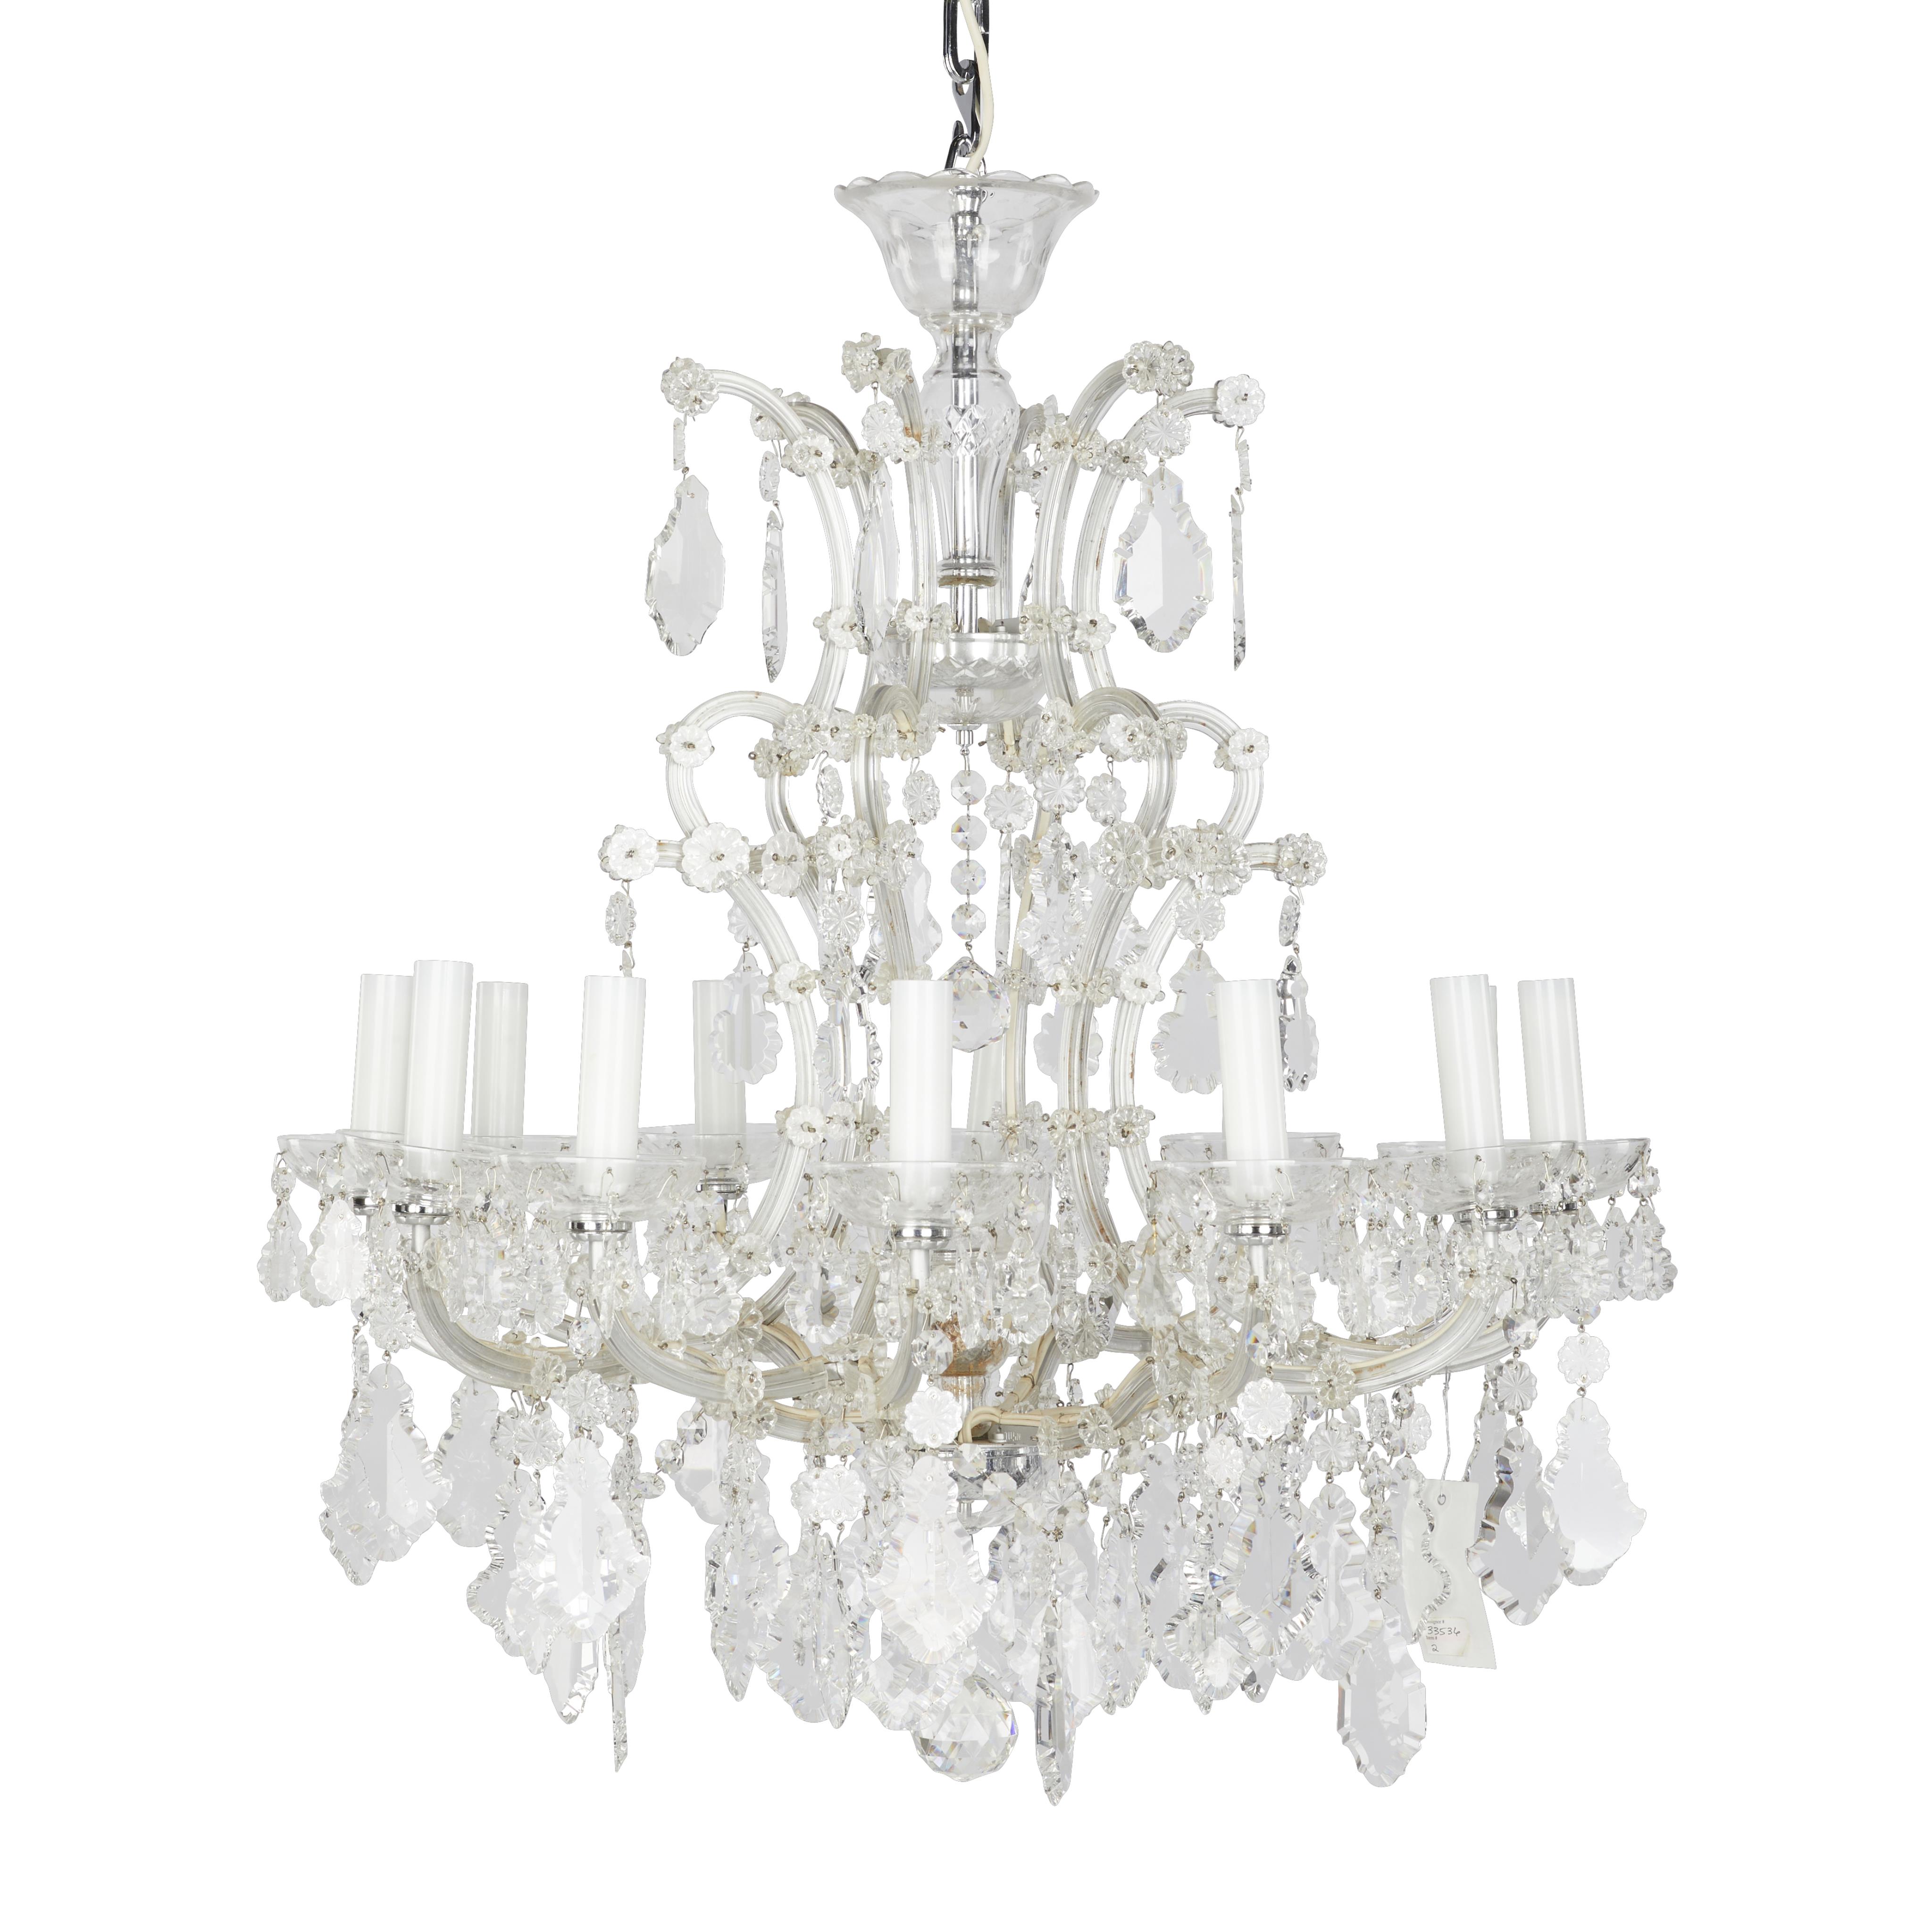 Maria Theresa Style Cut Crystal Chandelier - Image 4 of 17